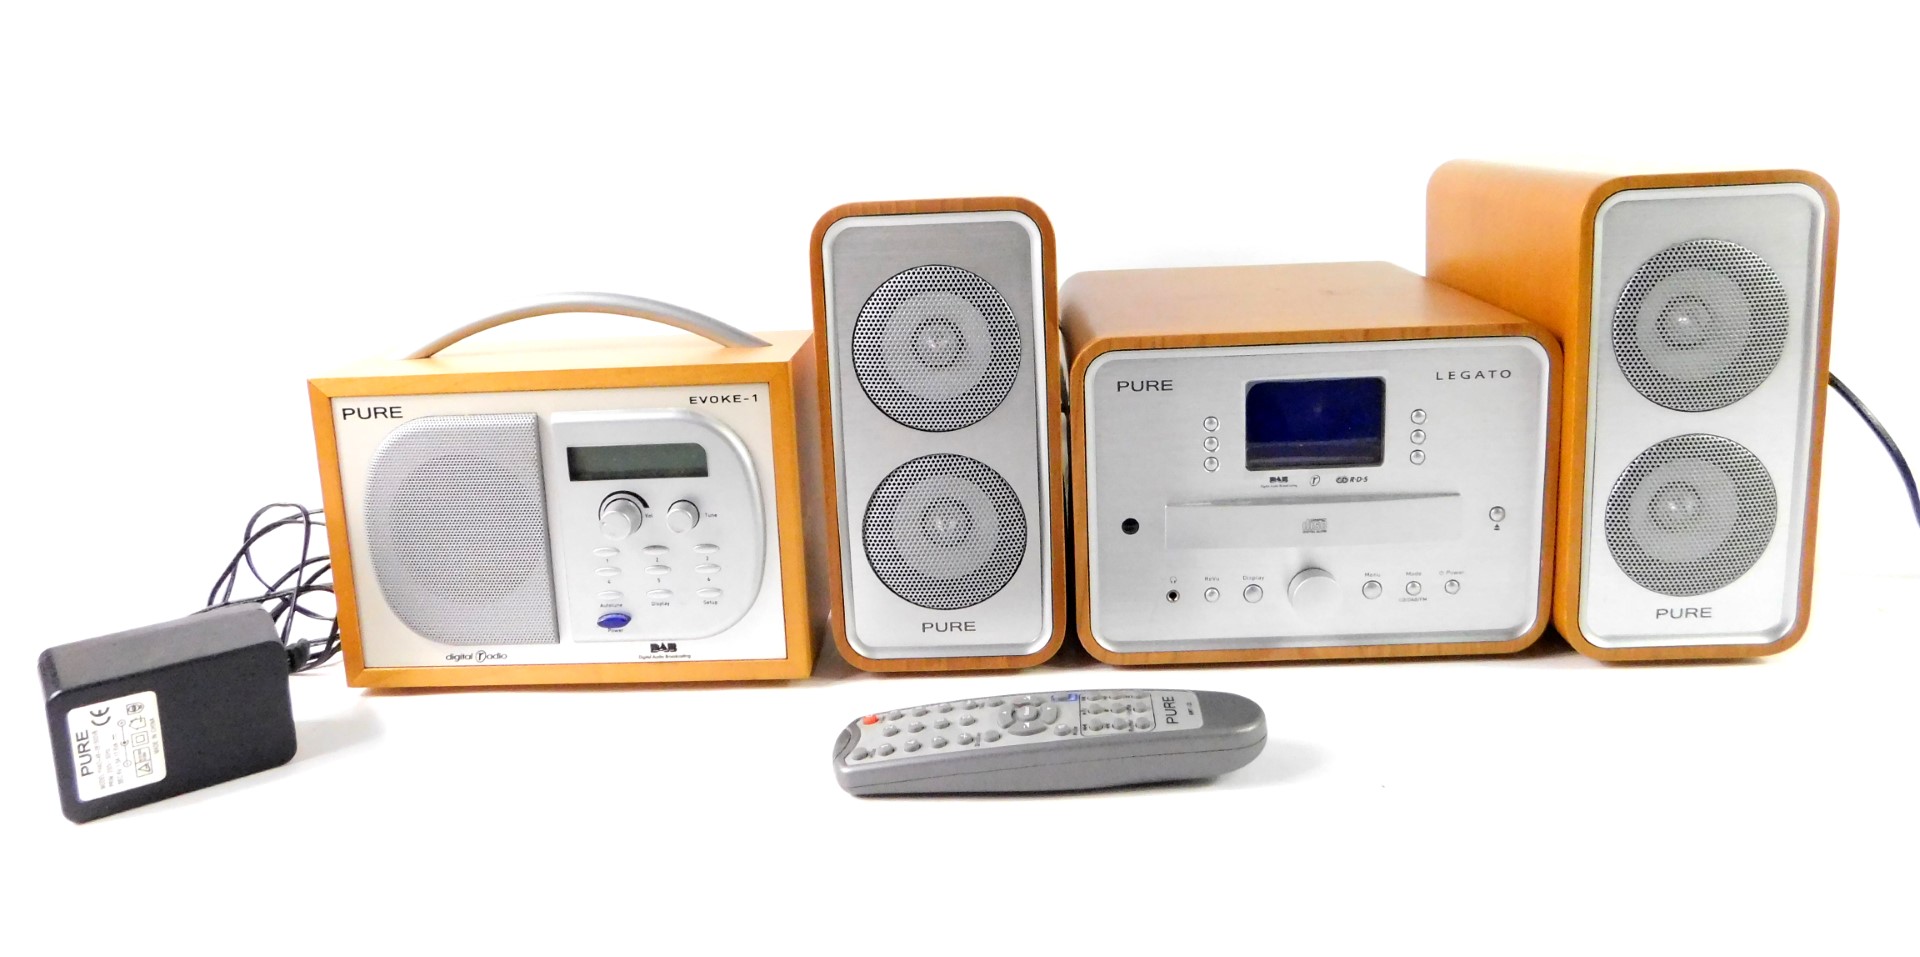 A Pure Evoke -1 Digital Radio, Pure Legato CD player, and a pair of pure speakers, with